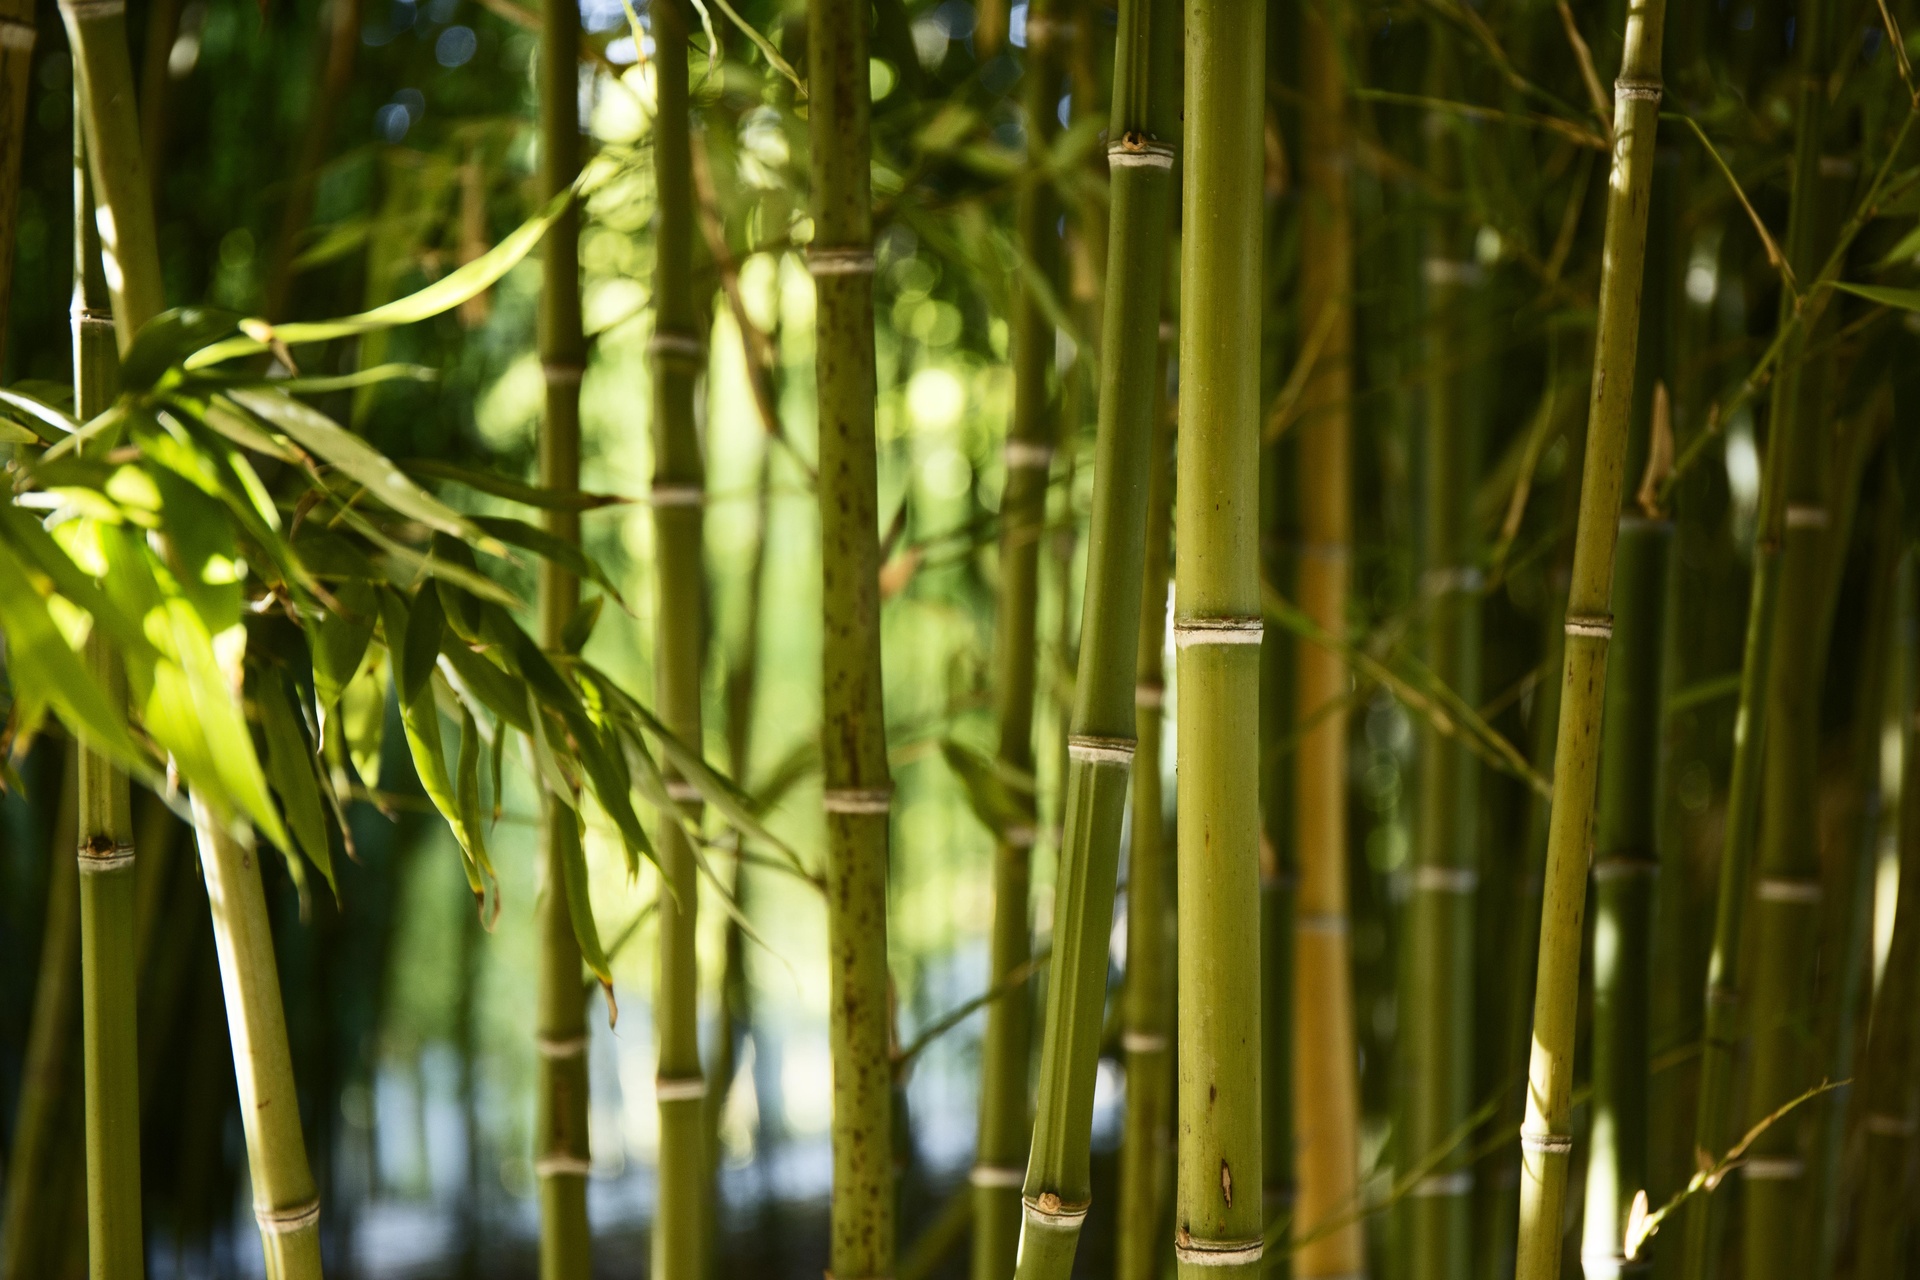 Bamboo Cultivation